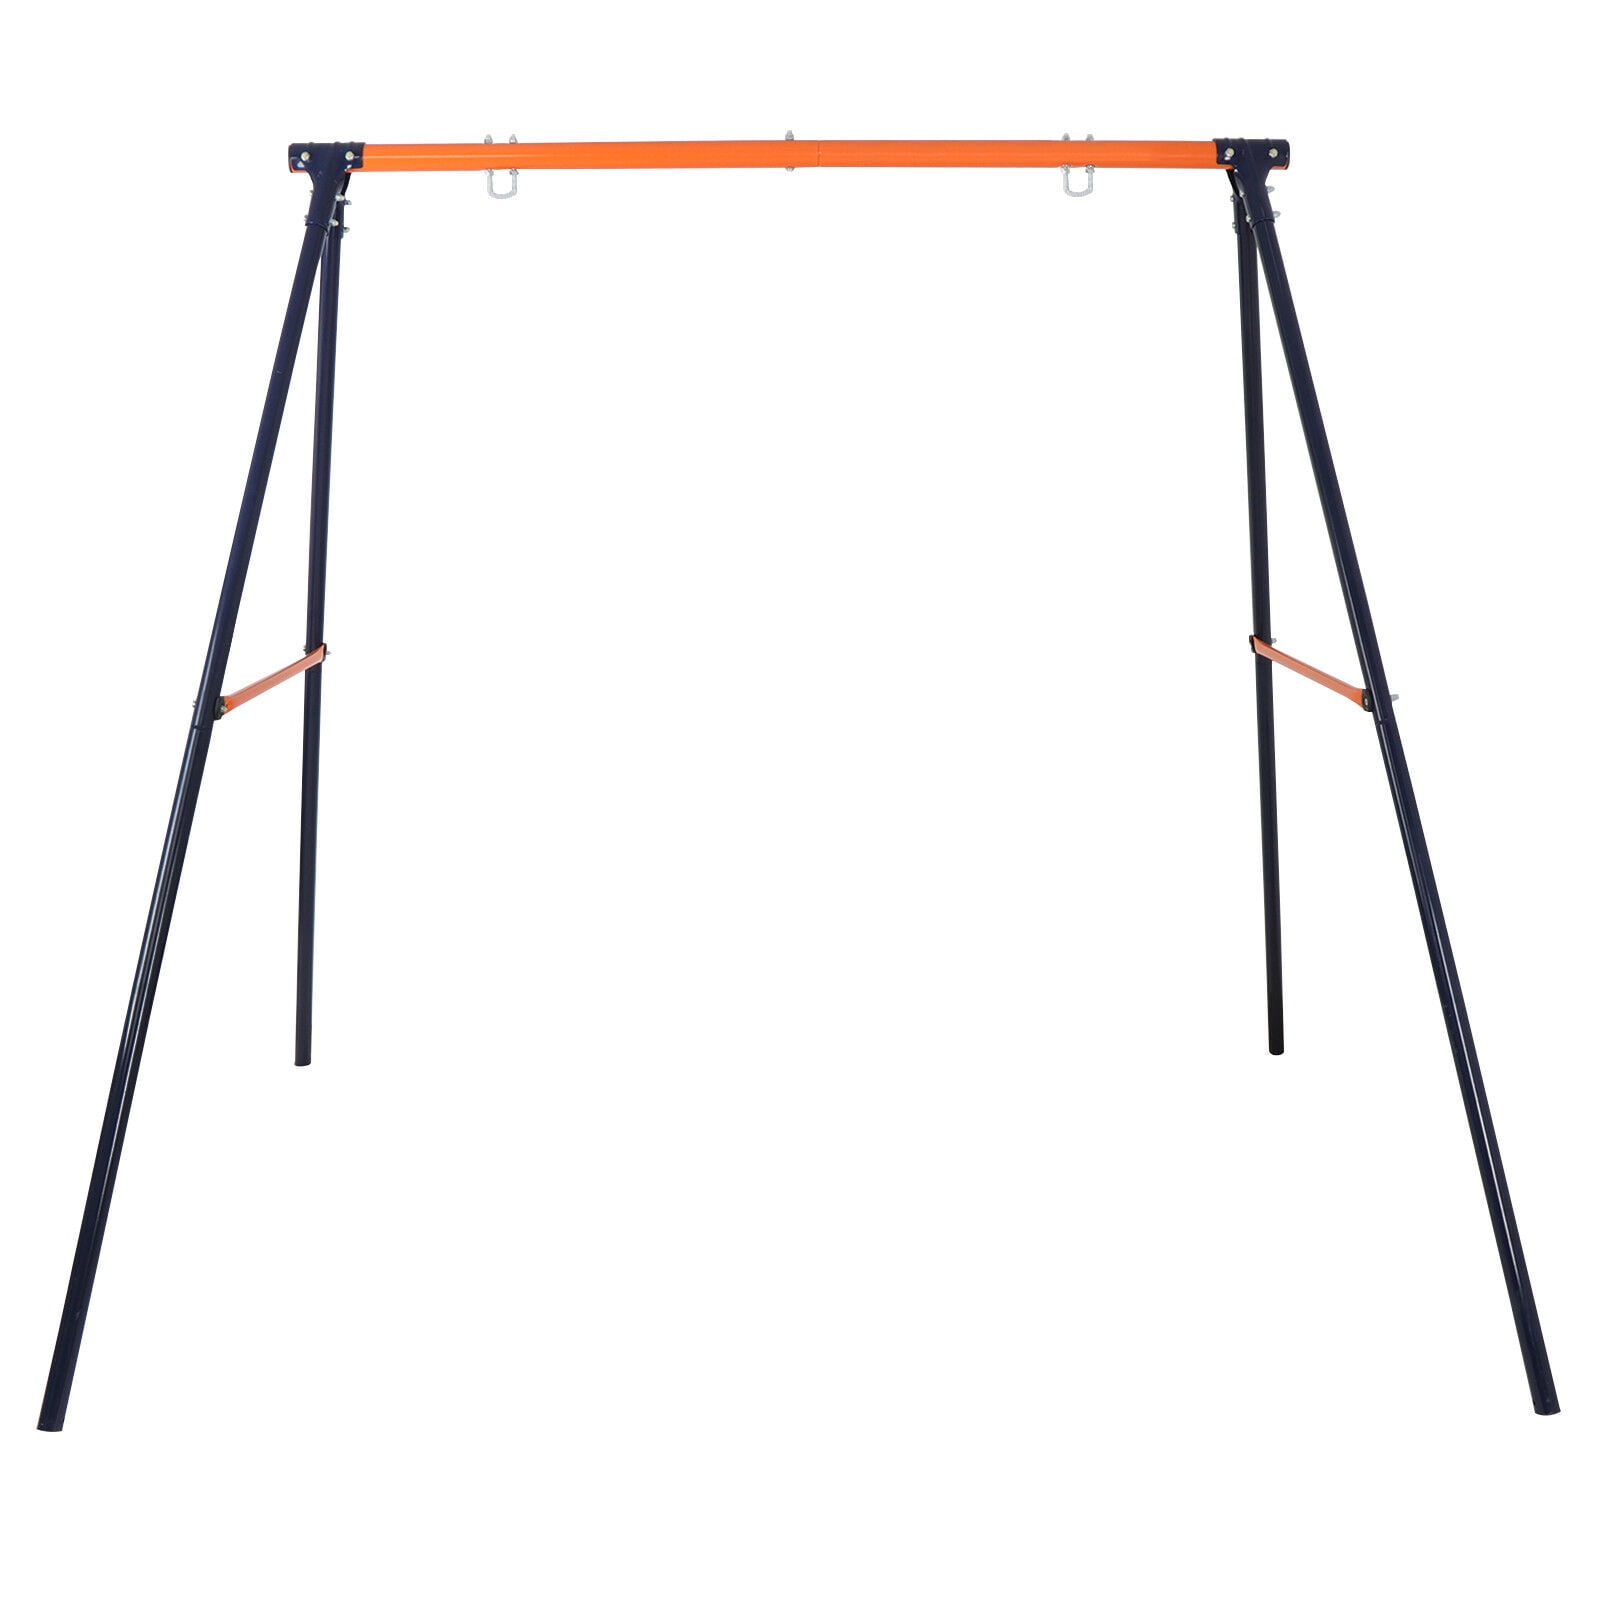 Details about   Weatherproof MAX 220 LBs Kids Adults Powder Coated Steel Swing Set Frame Stand 